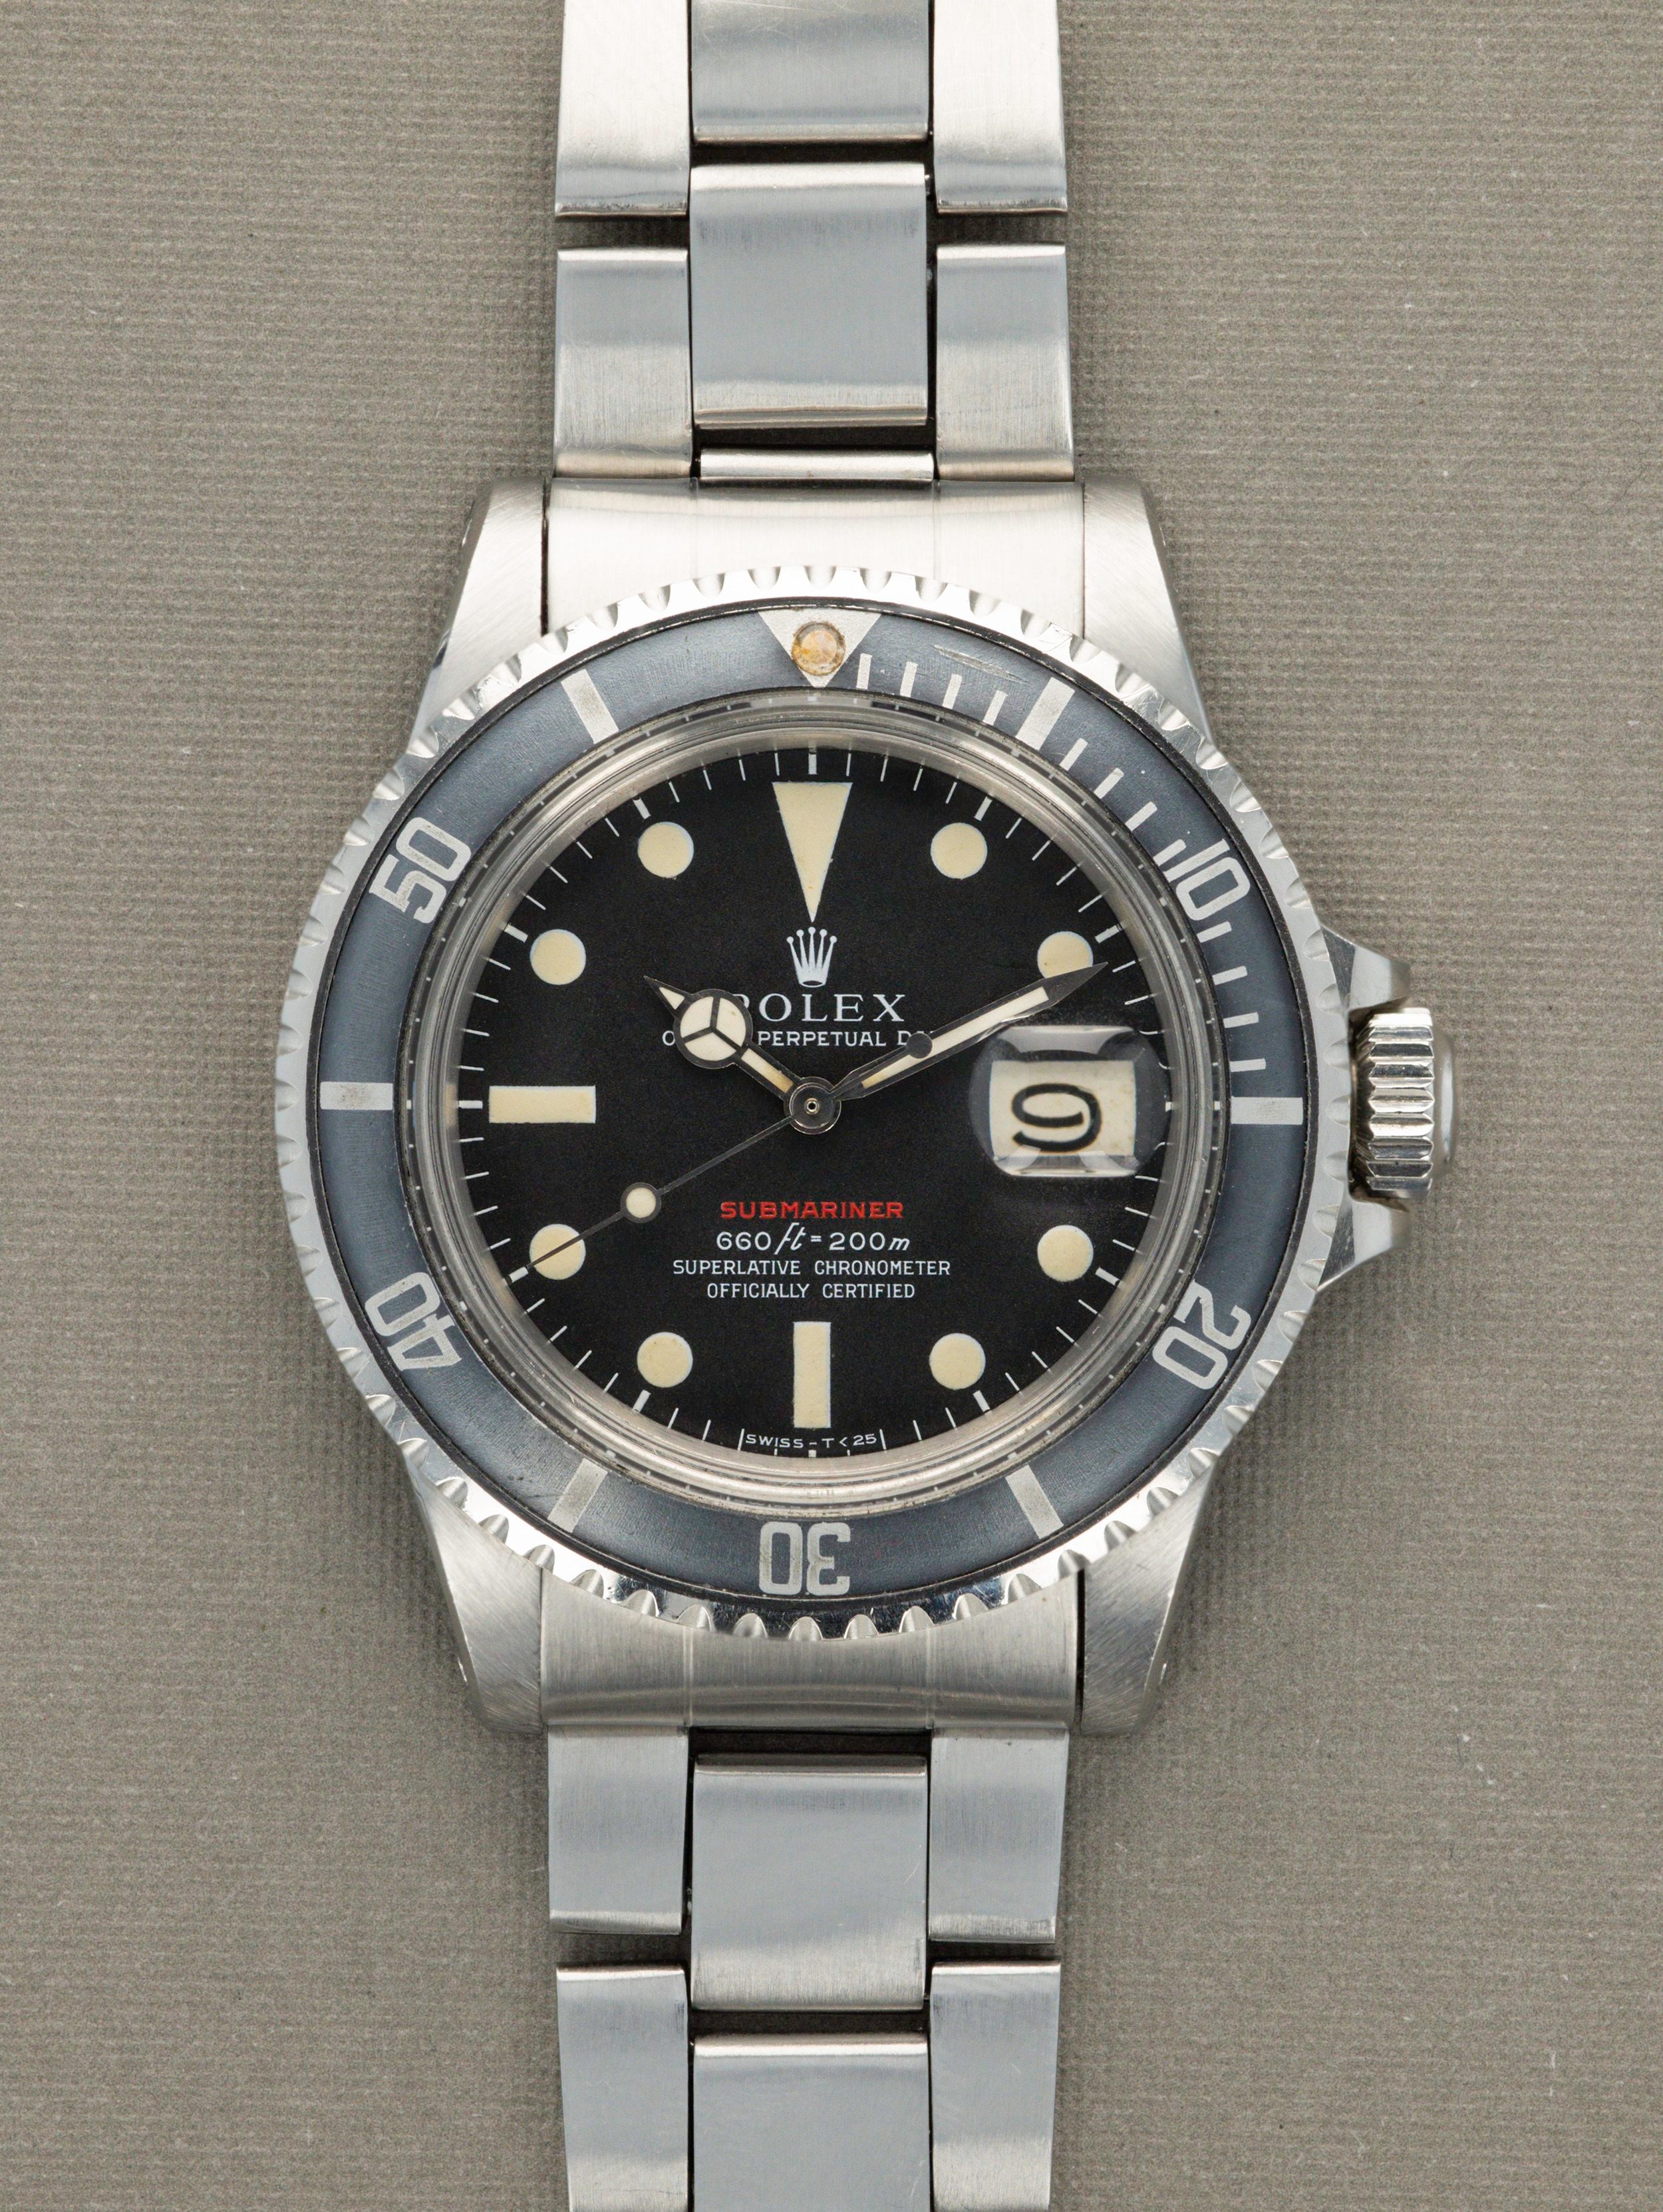 Rolex Submariner Ref 1680 - Mark 4 Red Sub with Full Kit